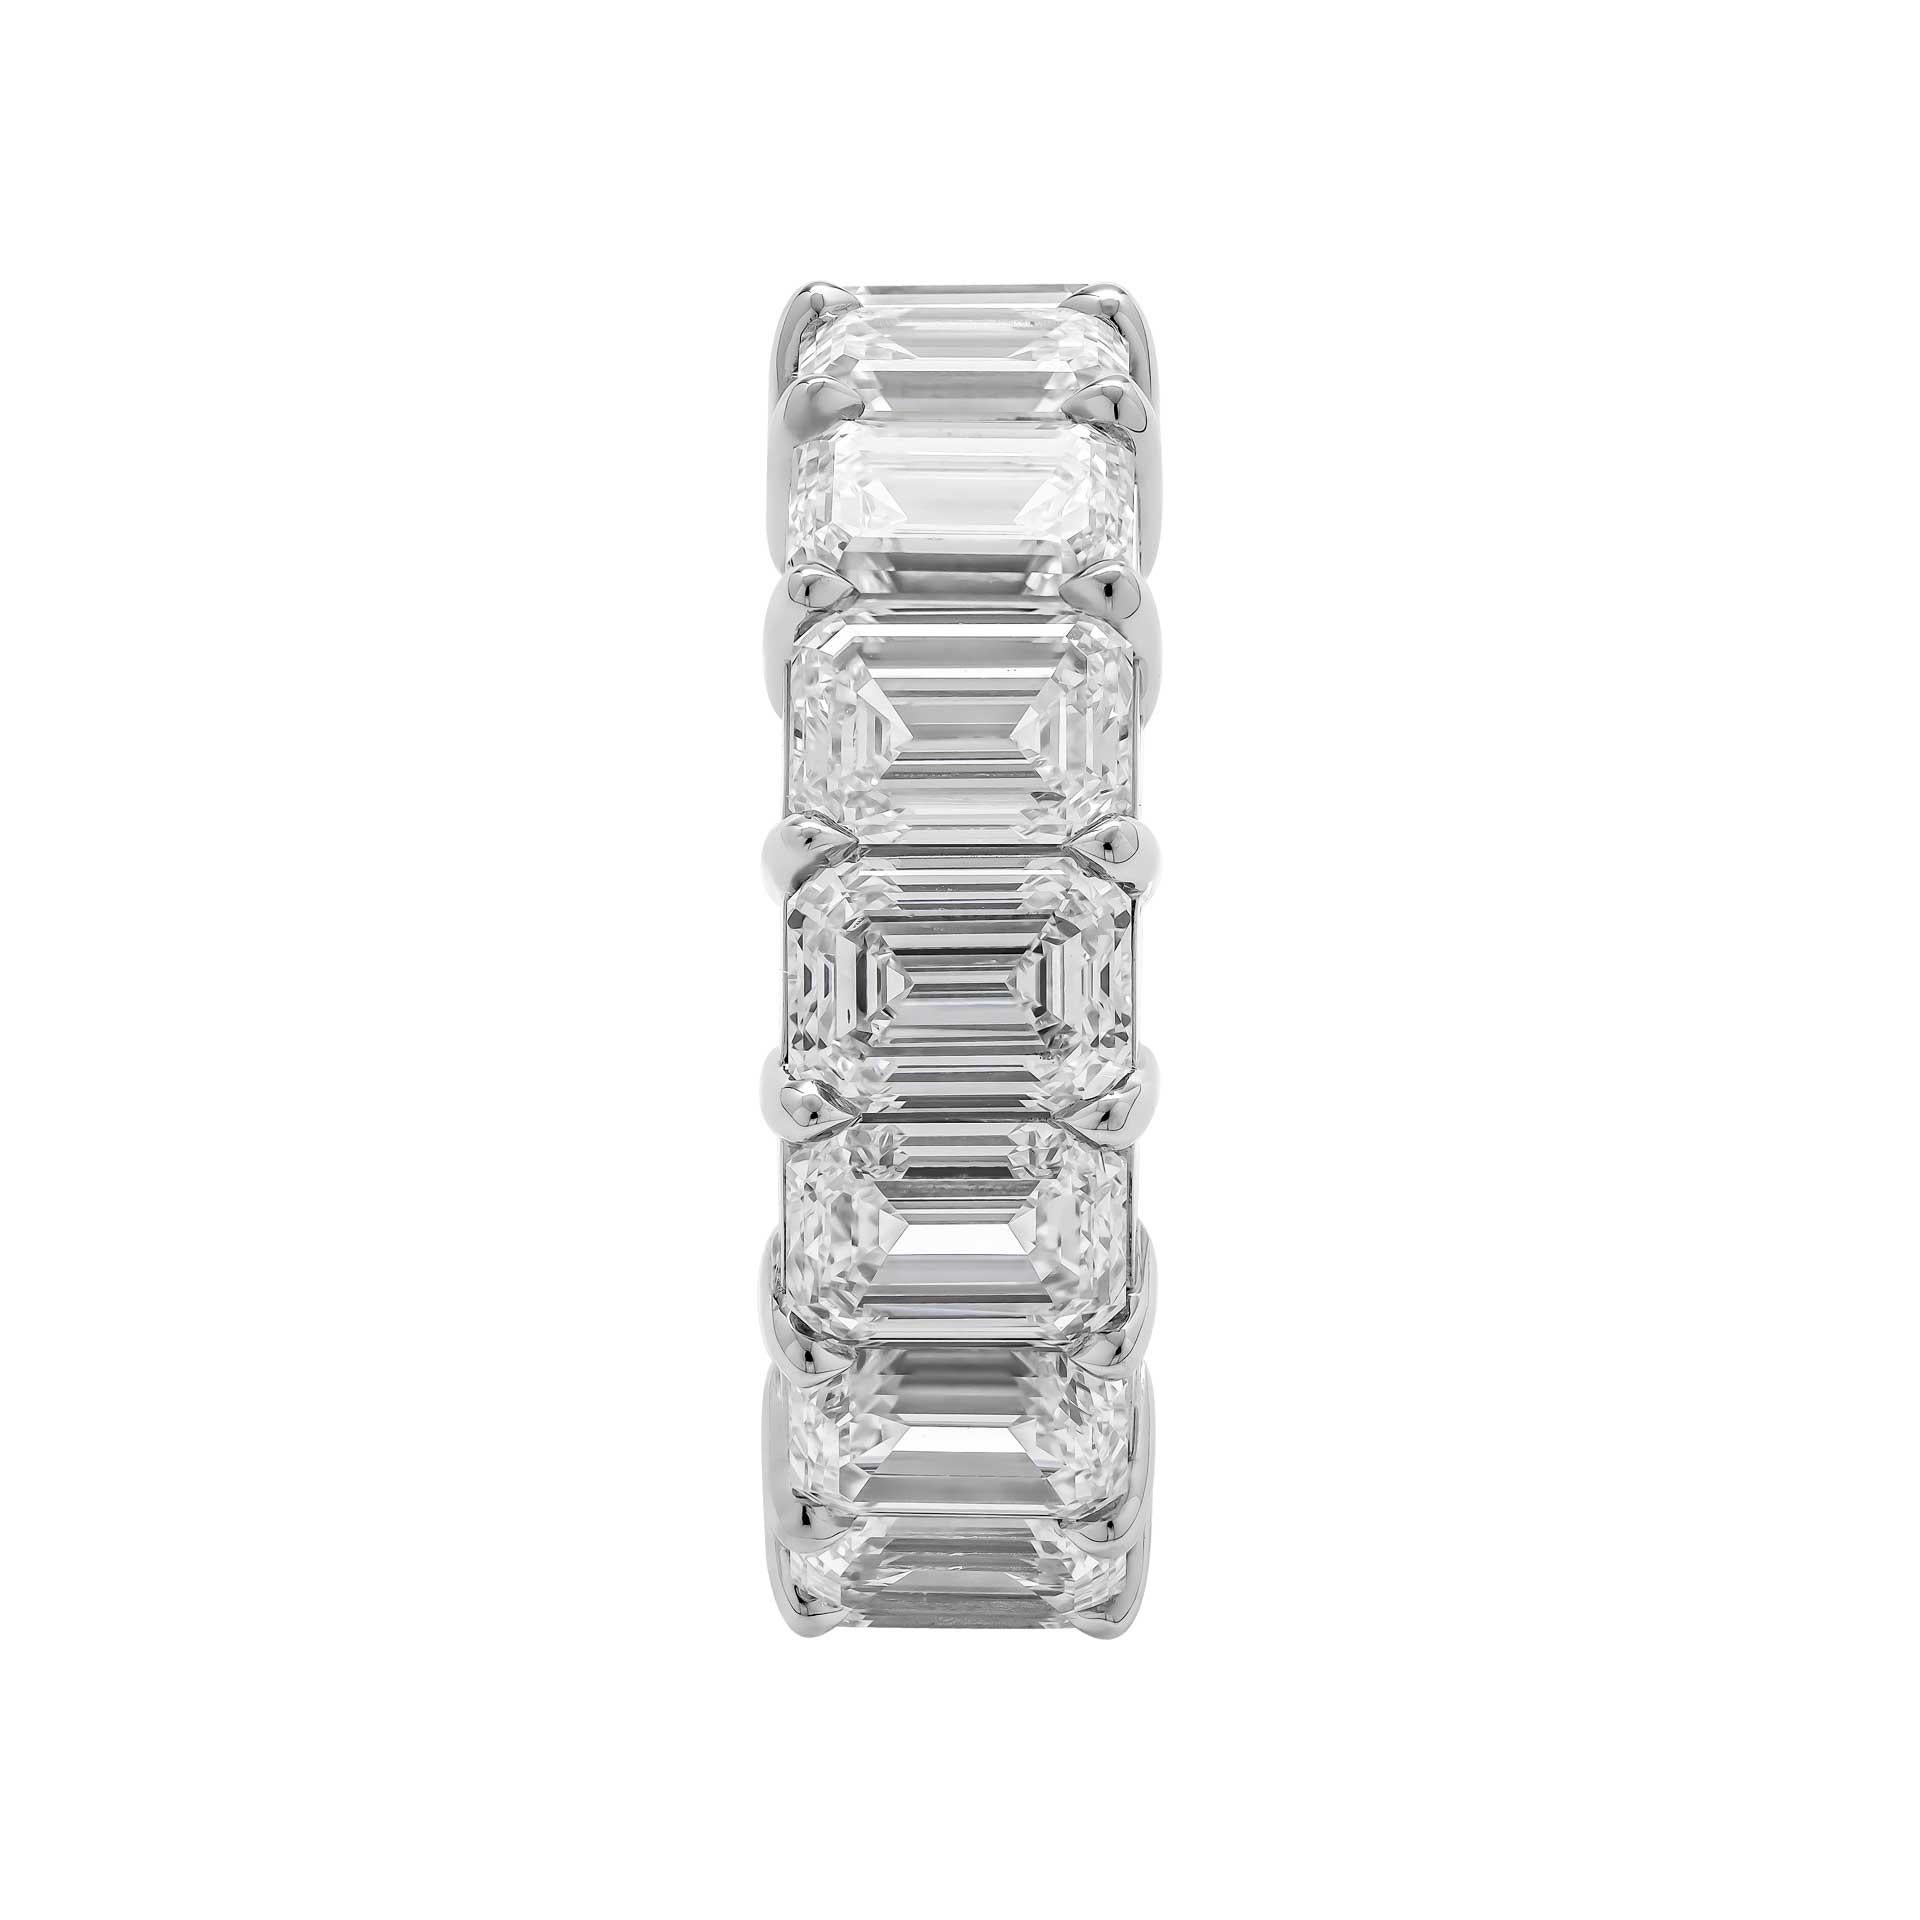 Emerald cut eternity band in PT950; 
16 stones (11.68ct) .70ct each
Size 6
All GIAs:
0.74CT E VVS1 GIA#2215926237 
0.74CT E VVS1 GIA#1226068060 
0.70CT F VVS1 GIA#6217948974 
0.78CT F VVS1 GIA#2213831592 
0.70CT G VVS1 GIA#5221035375 
0.74CT G VVS1